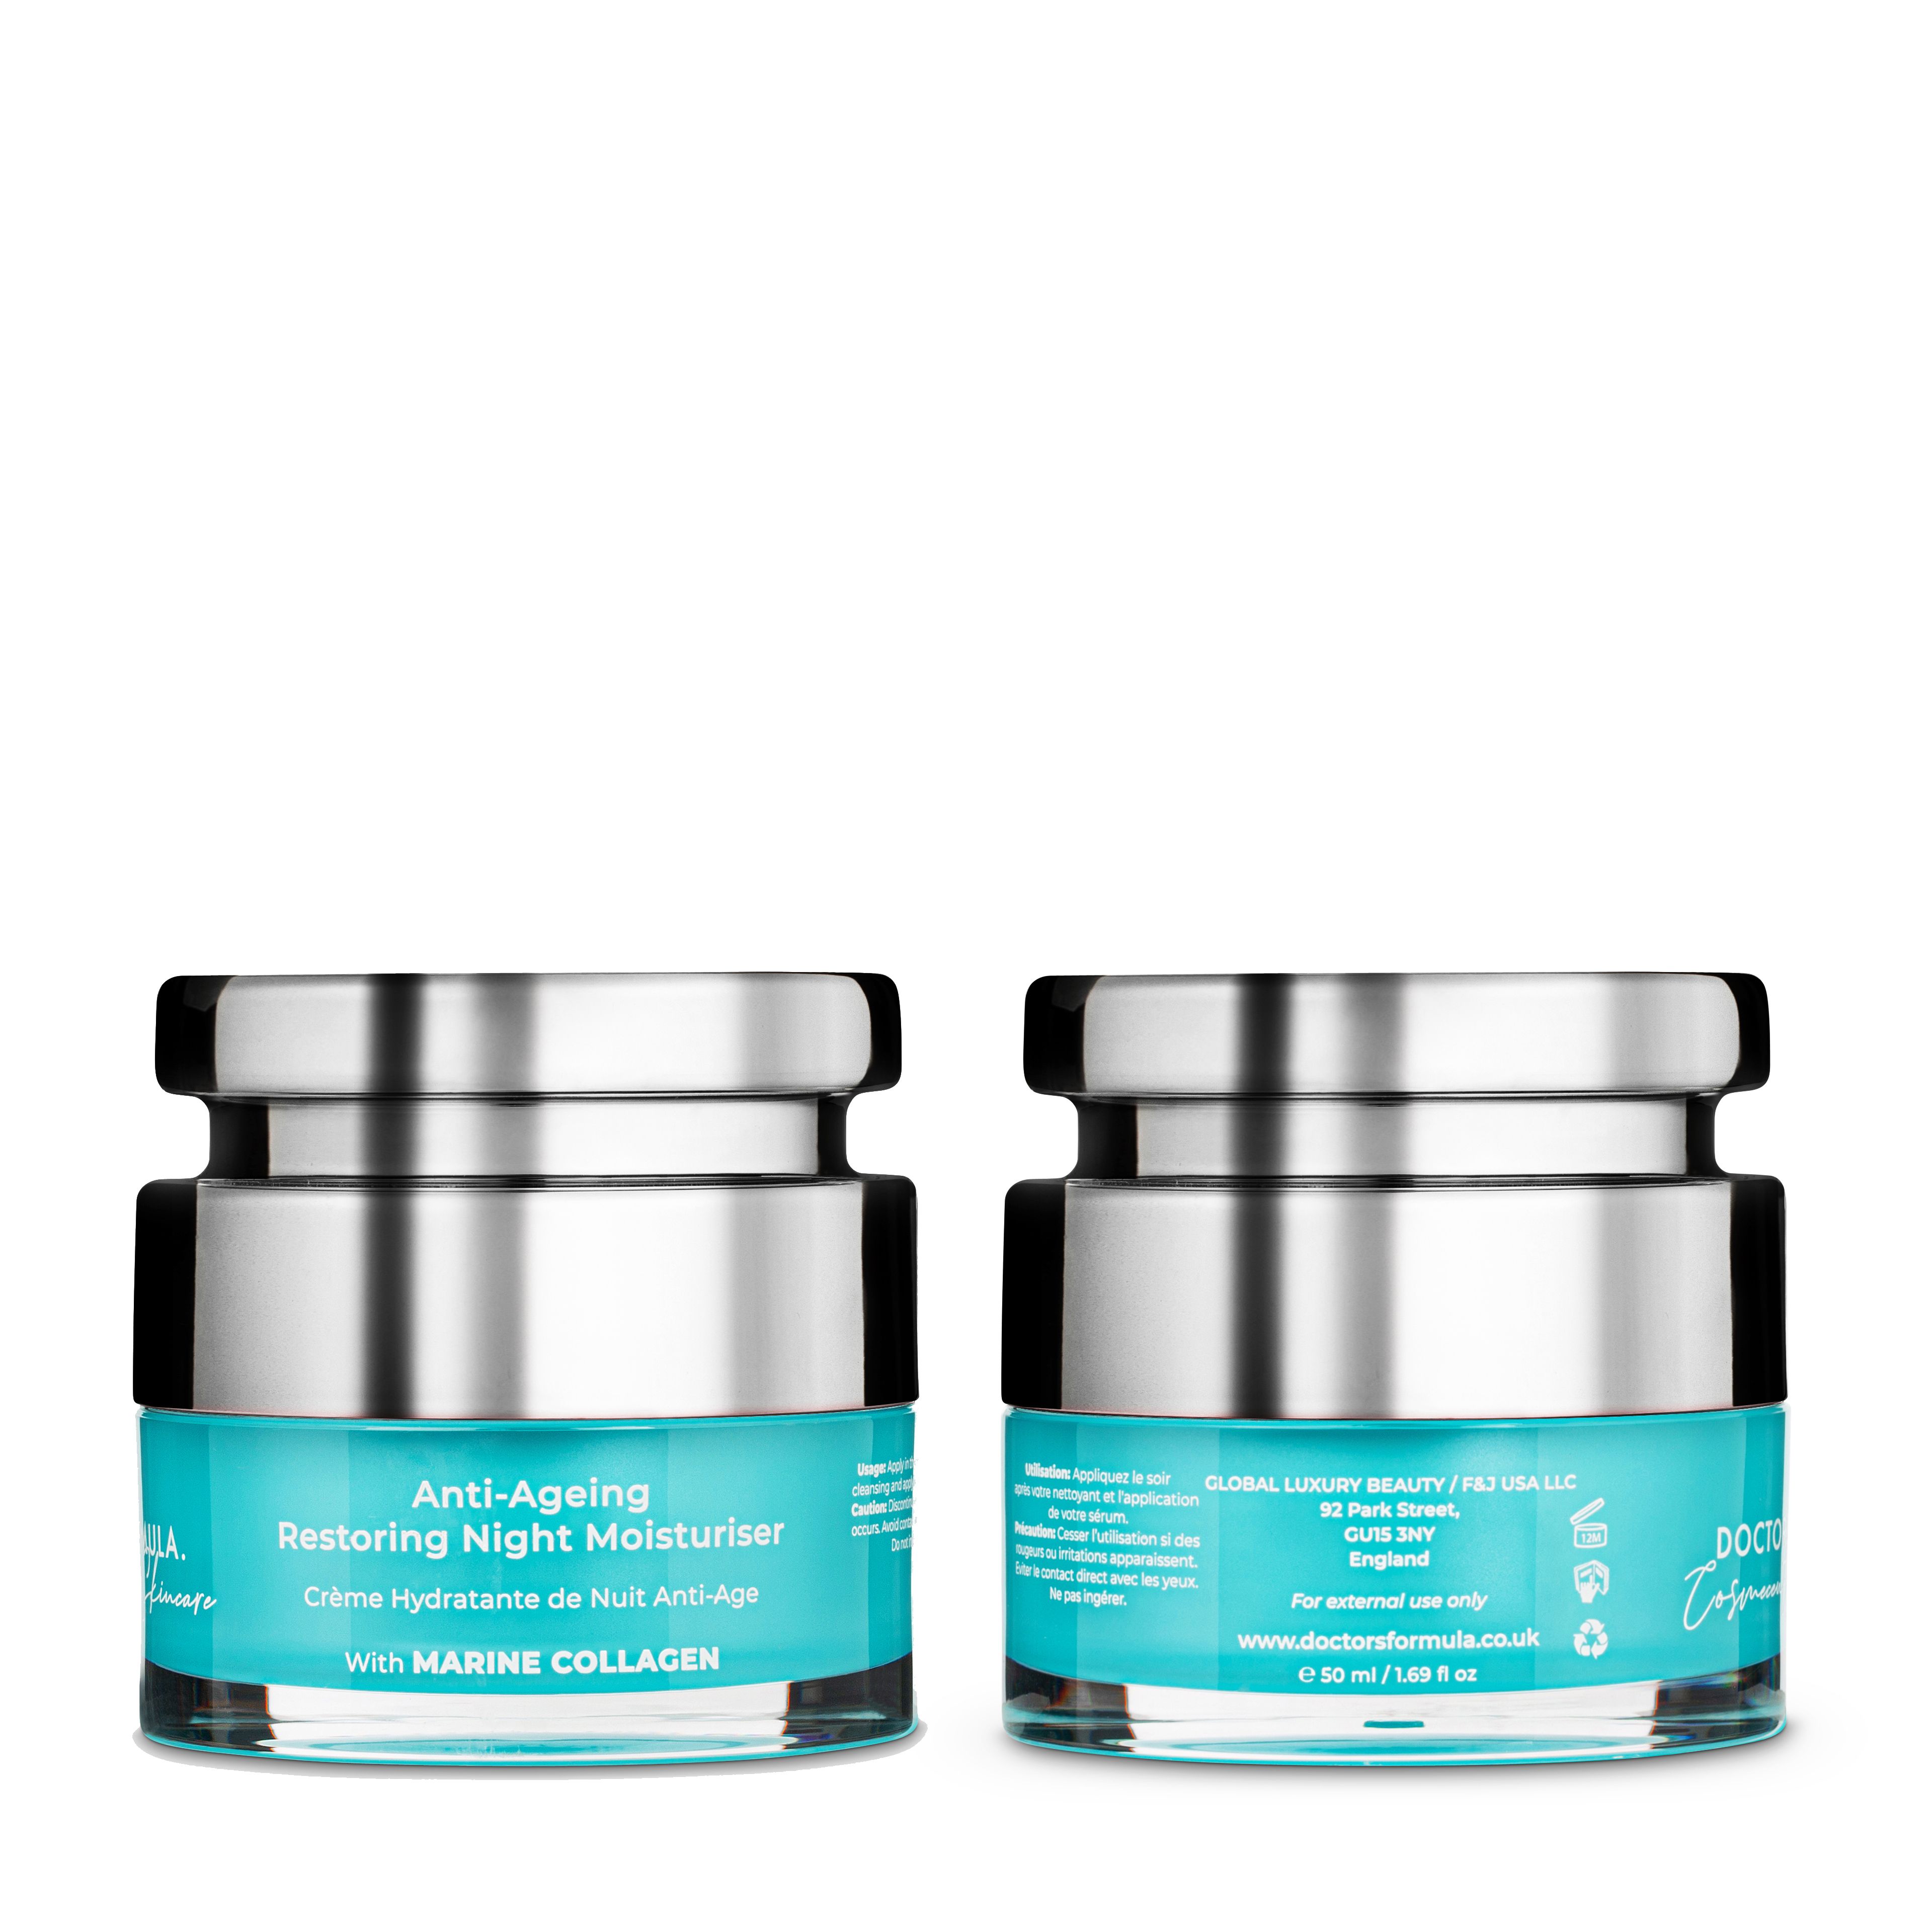 Restructuring Anti-Ageing Restoring Night Moisturiser replenishes whilst you sleep. 
A trio of Marine Collagen, Soluble Collagen and anti-oxidant rich Coconut Oil. 
Renew and regenerate overnight for a restorative skin experience.

Key Ingredients:
- Marine collagen amino acids intensely hydrate, provide super-enriched suppleness and boost the building blocks which maintain the skin.
- Soluble collagen infuses with natural moisture into the skin, defining texture for a more radiant, youthful appearance.
- Precision antioxidants and fatty acids in coconut oil, infuse with visible hydration, restore resilient texture and invigorate the skin’s natural protective shield.

Usage:
Apply 1-2 pumps in the evening to face, neck and decollete, after applying your serum or ampoule.

100% Cruelty Free